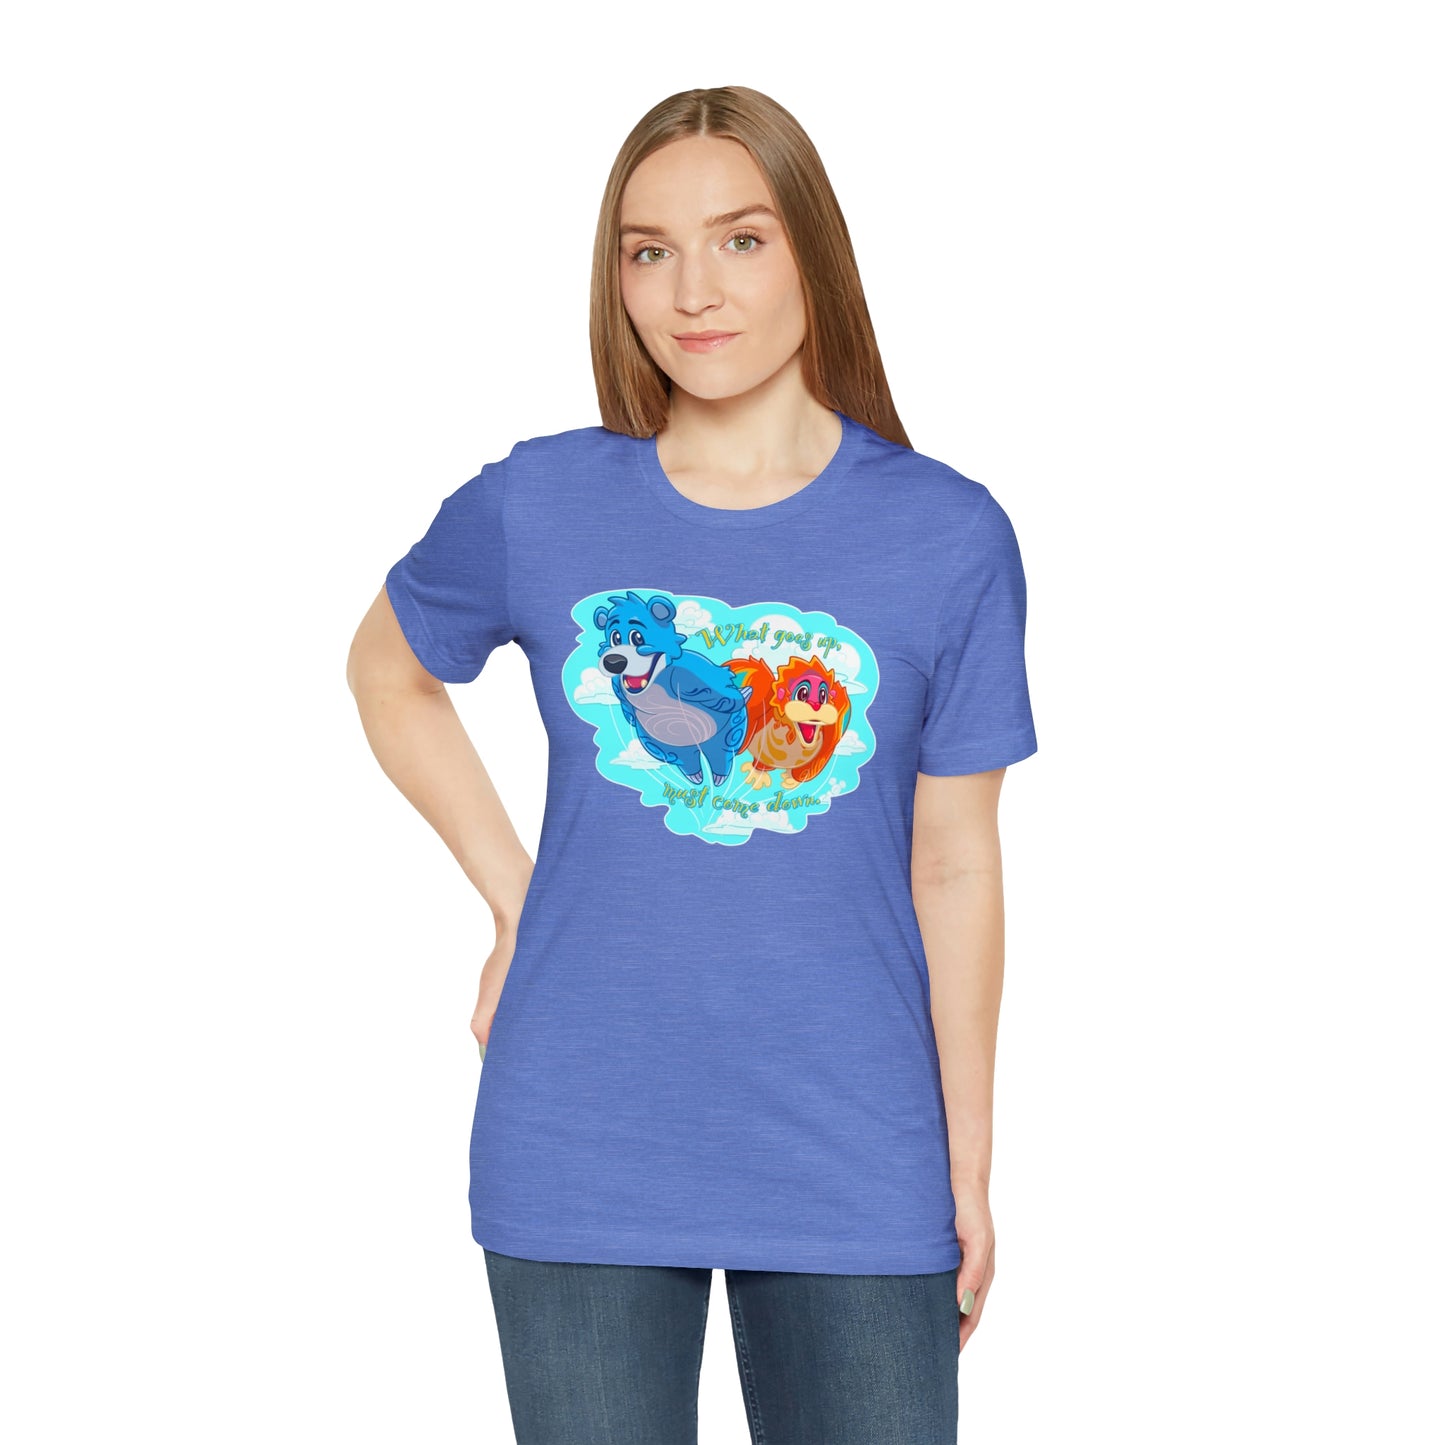 Kite Tails t shirt blue Womens fit